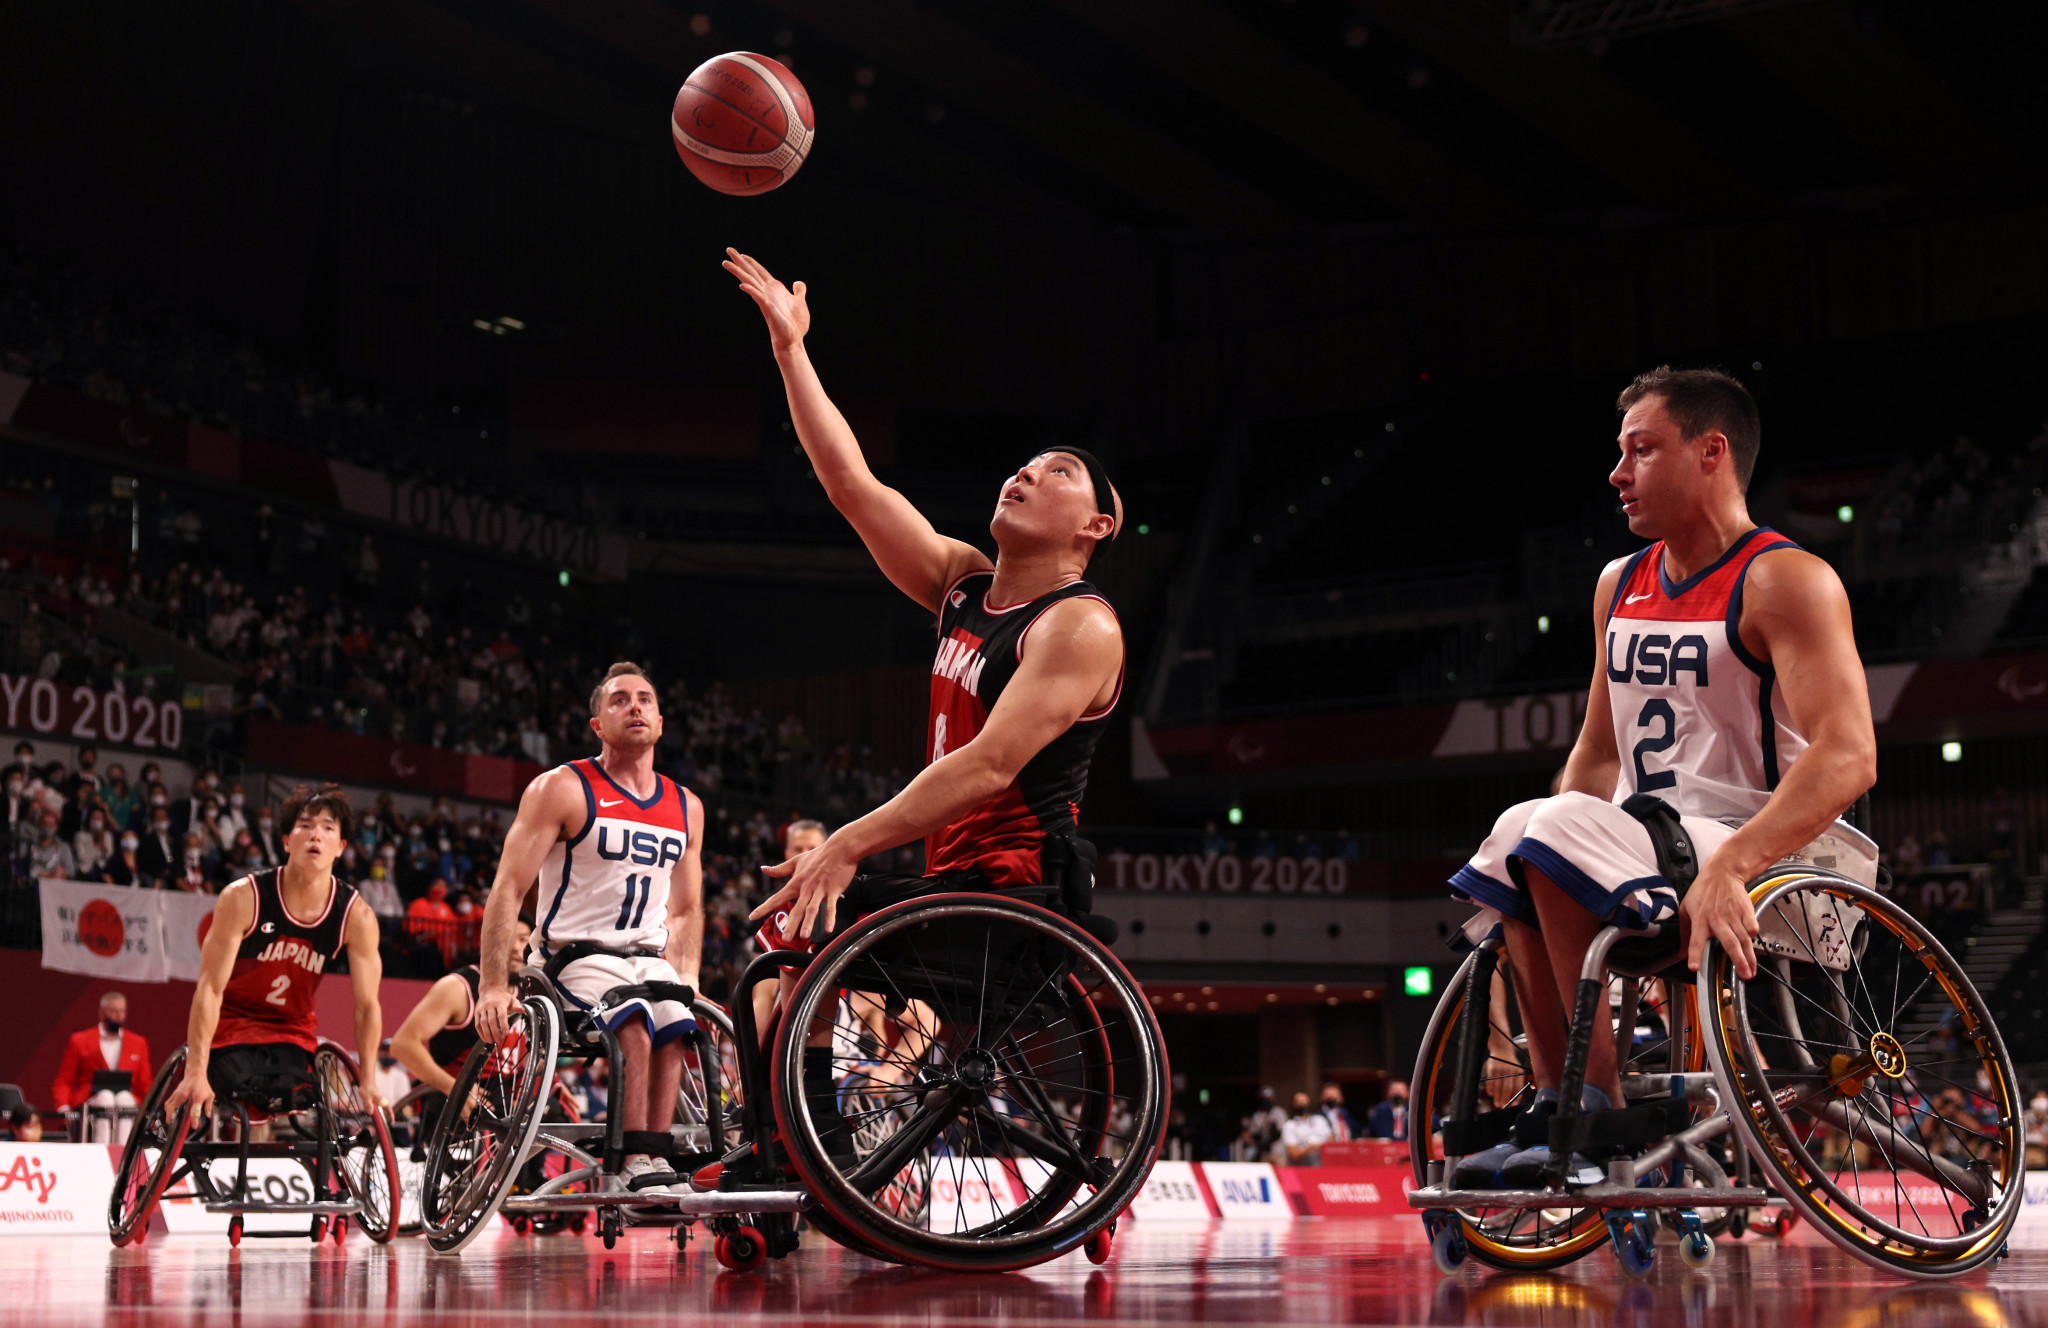 IWBF extends classification transition provision to cover World Championships